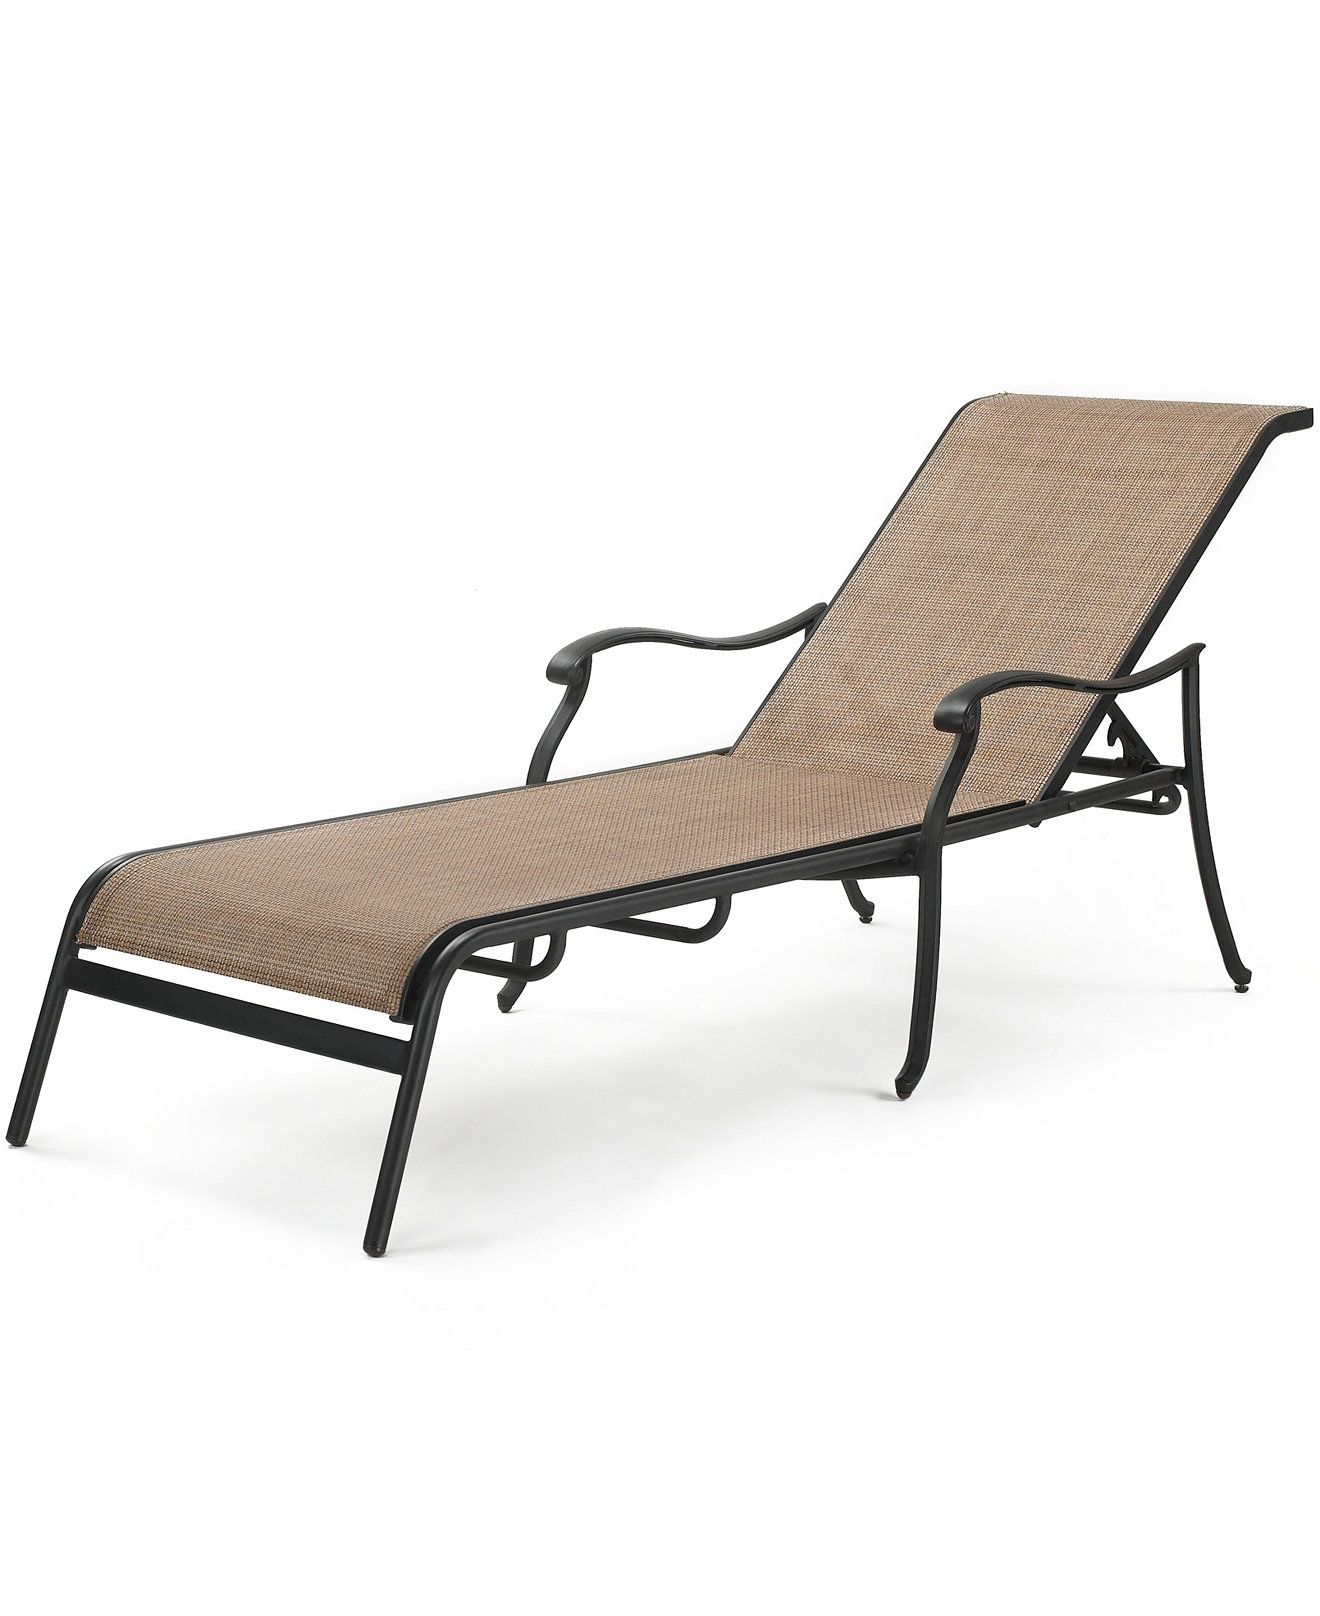 Best Solutions Of Martha Stewart Chaise Lounge With Chaise Lounge Throughout Widely Used Martha Stewart Outdoor Chaise Lounge Chairs (View 12 of 15)